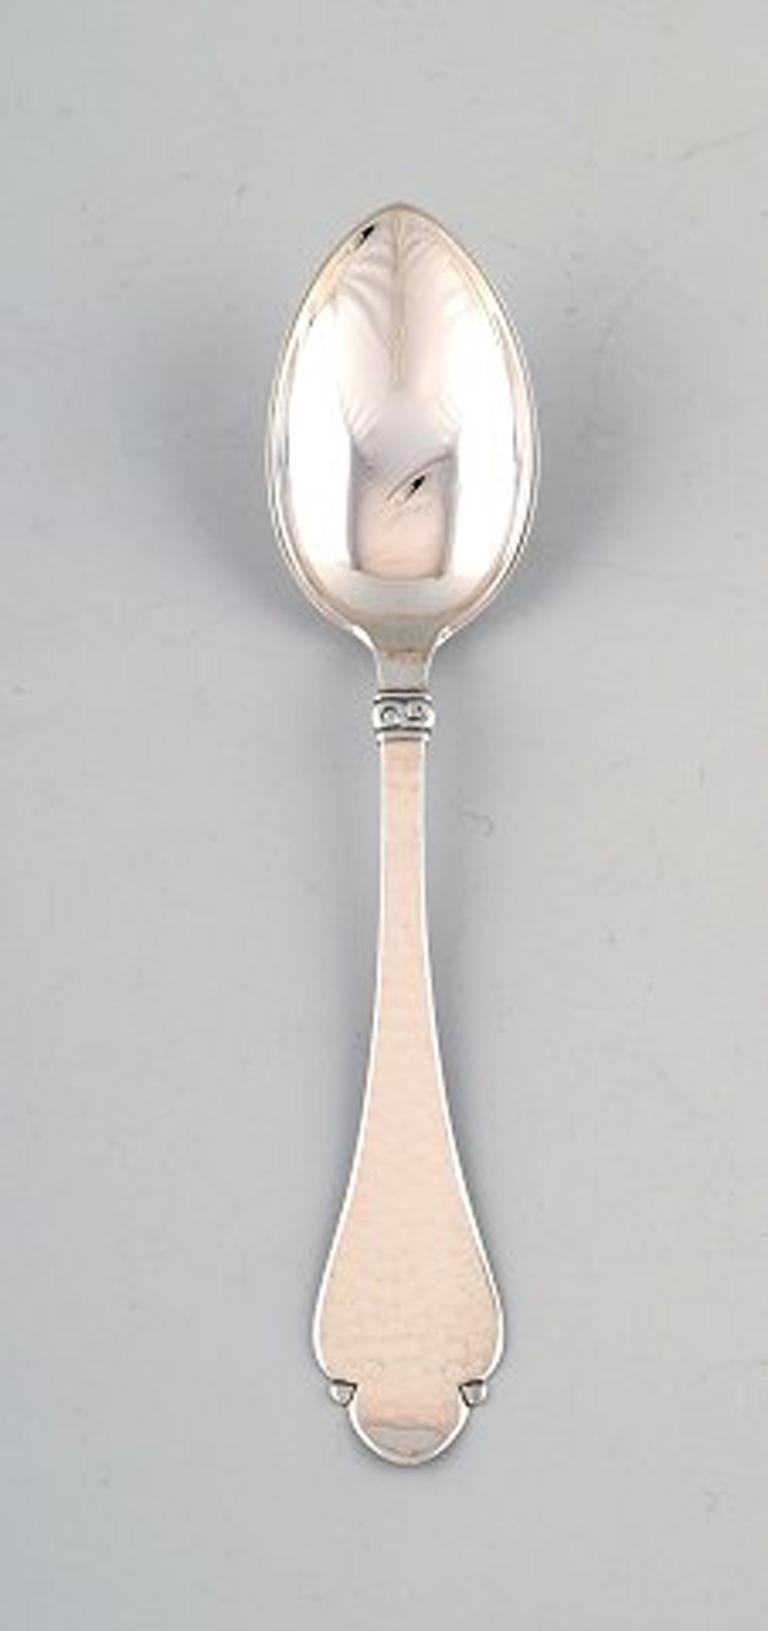 Horsens silver, Denmark: W & S Sørensen. 9 pieces. Bernstoff table spoons
Cutlery in Danish silver. 1955.
Measures: 18 cm.
Stamped.
In very good condition.